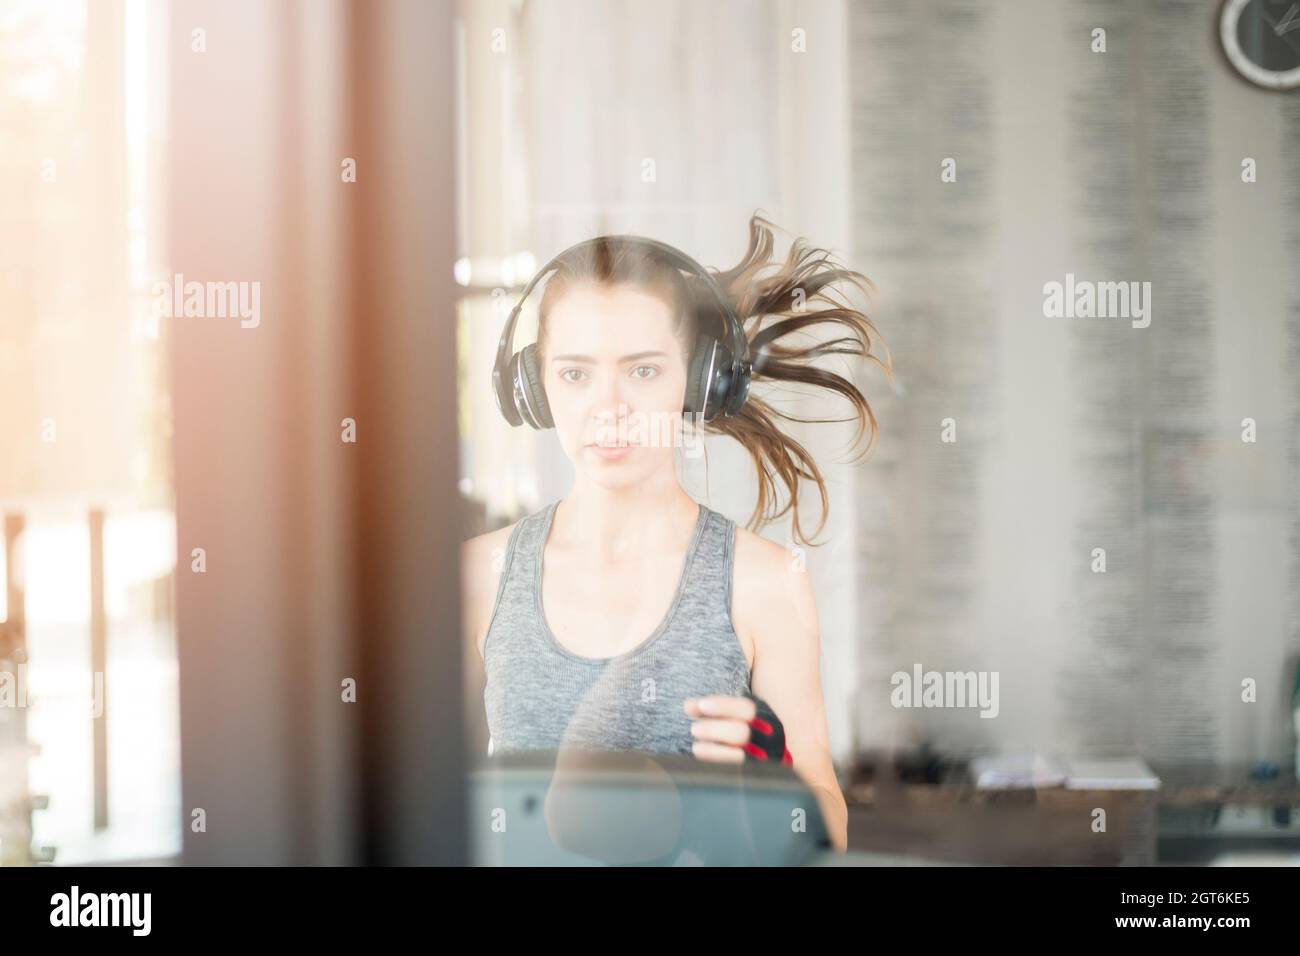 Portrait Of Young Woman In Gym Seen Through Window Glass Stock Photo